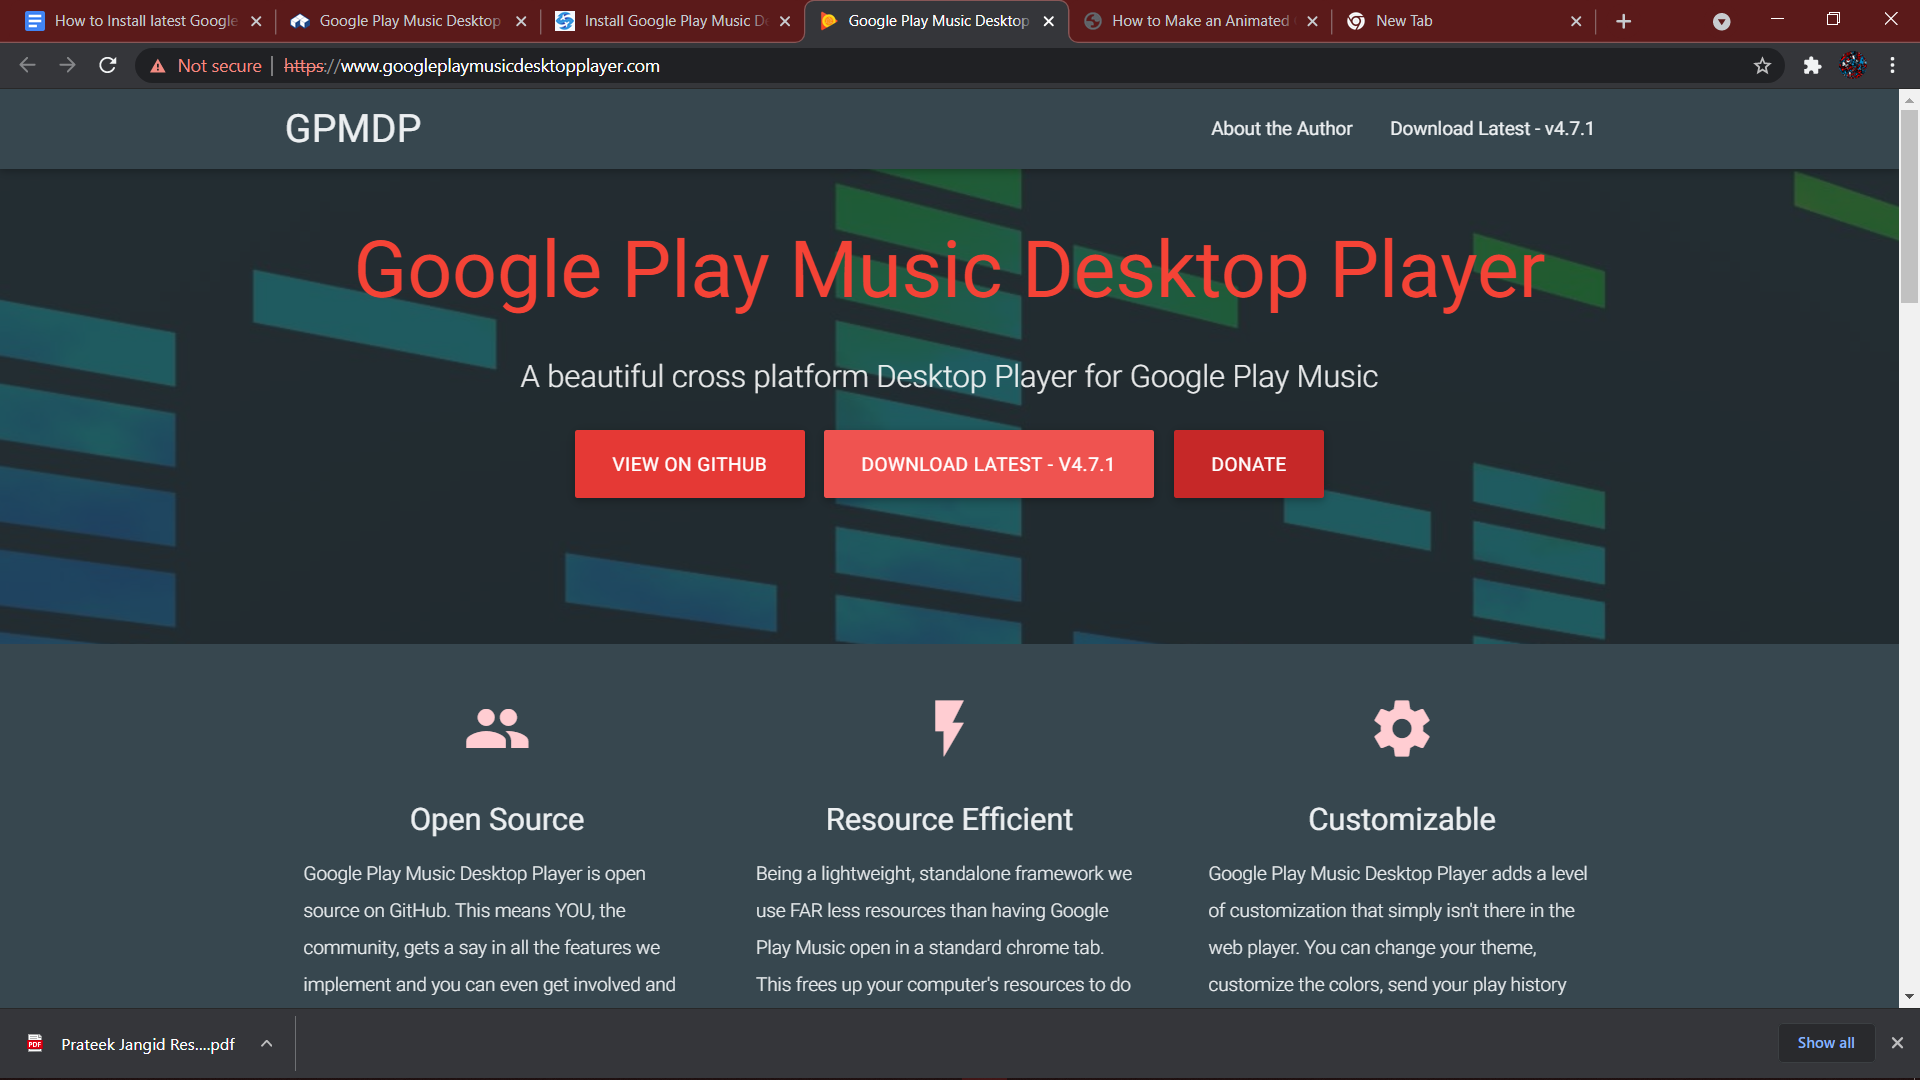 google play music manager for linux